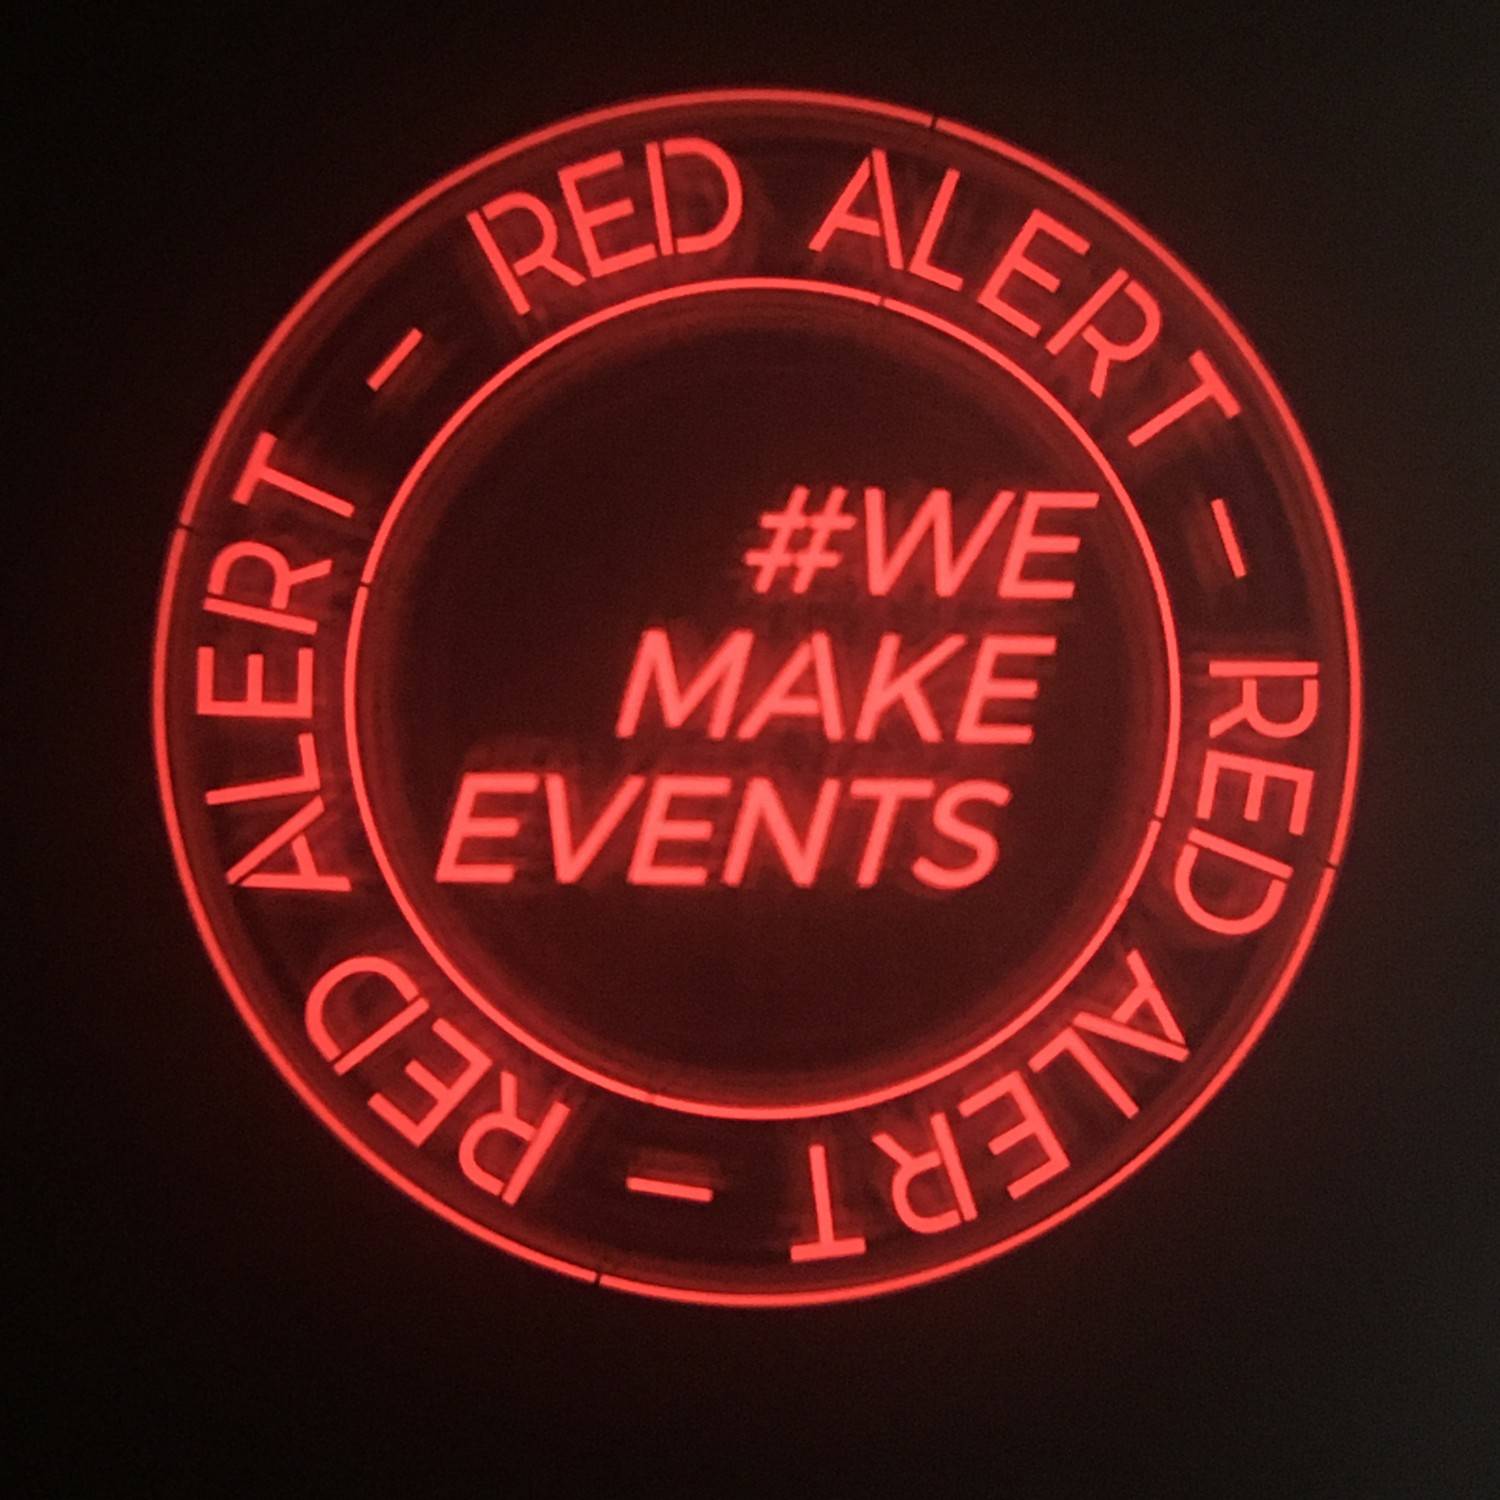 The Mendel Center participates in live events industry Red Alert Day